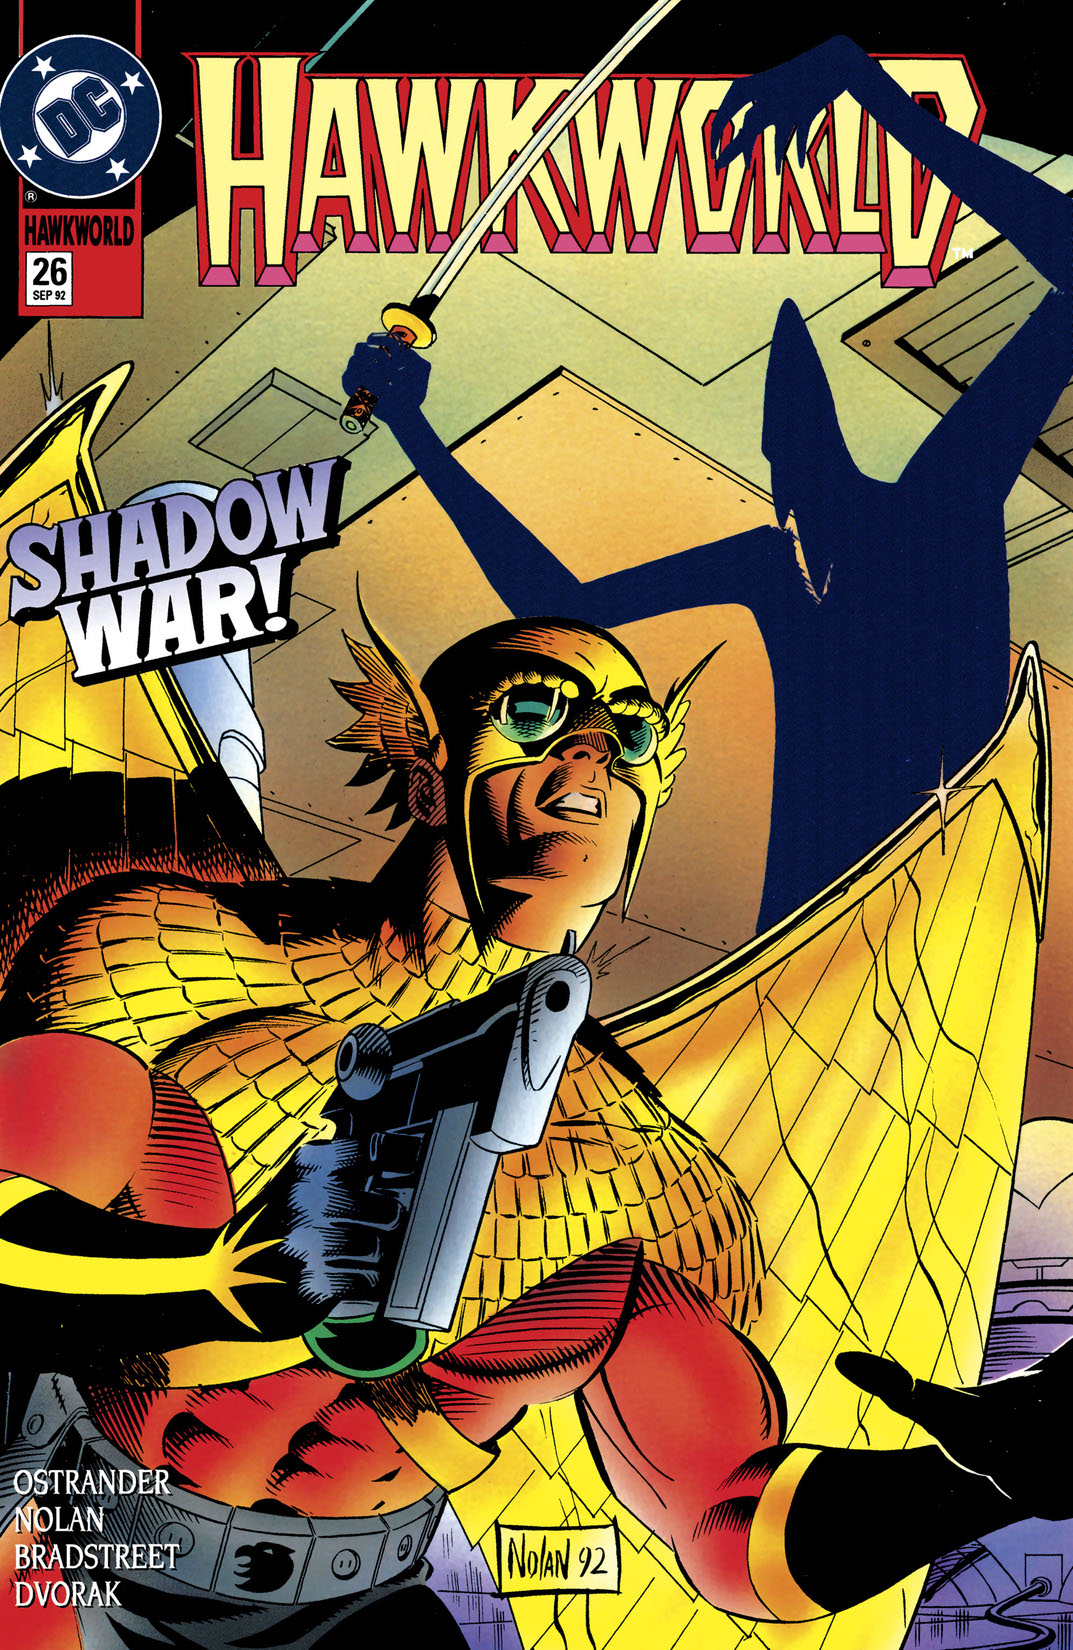 Hawkworld (1989-) #26 preview images